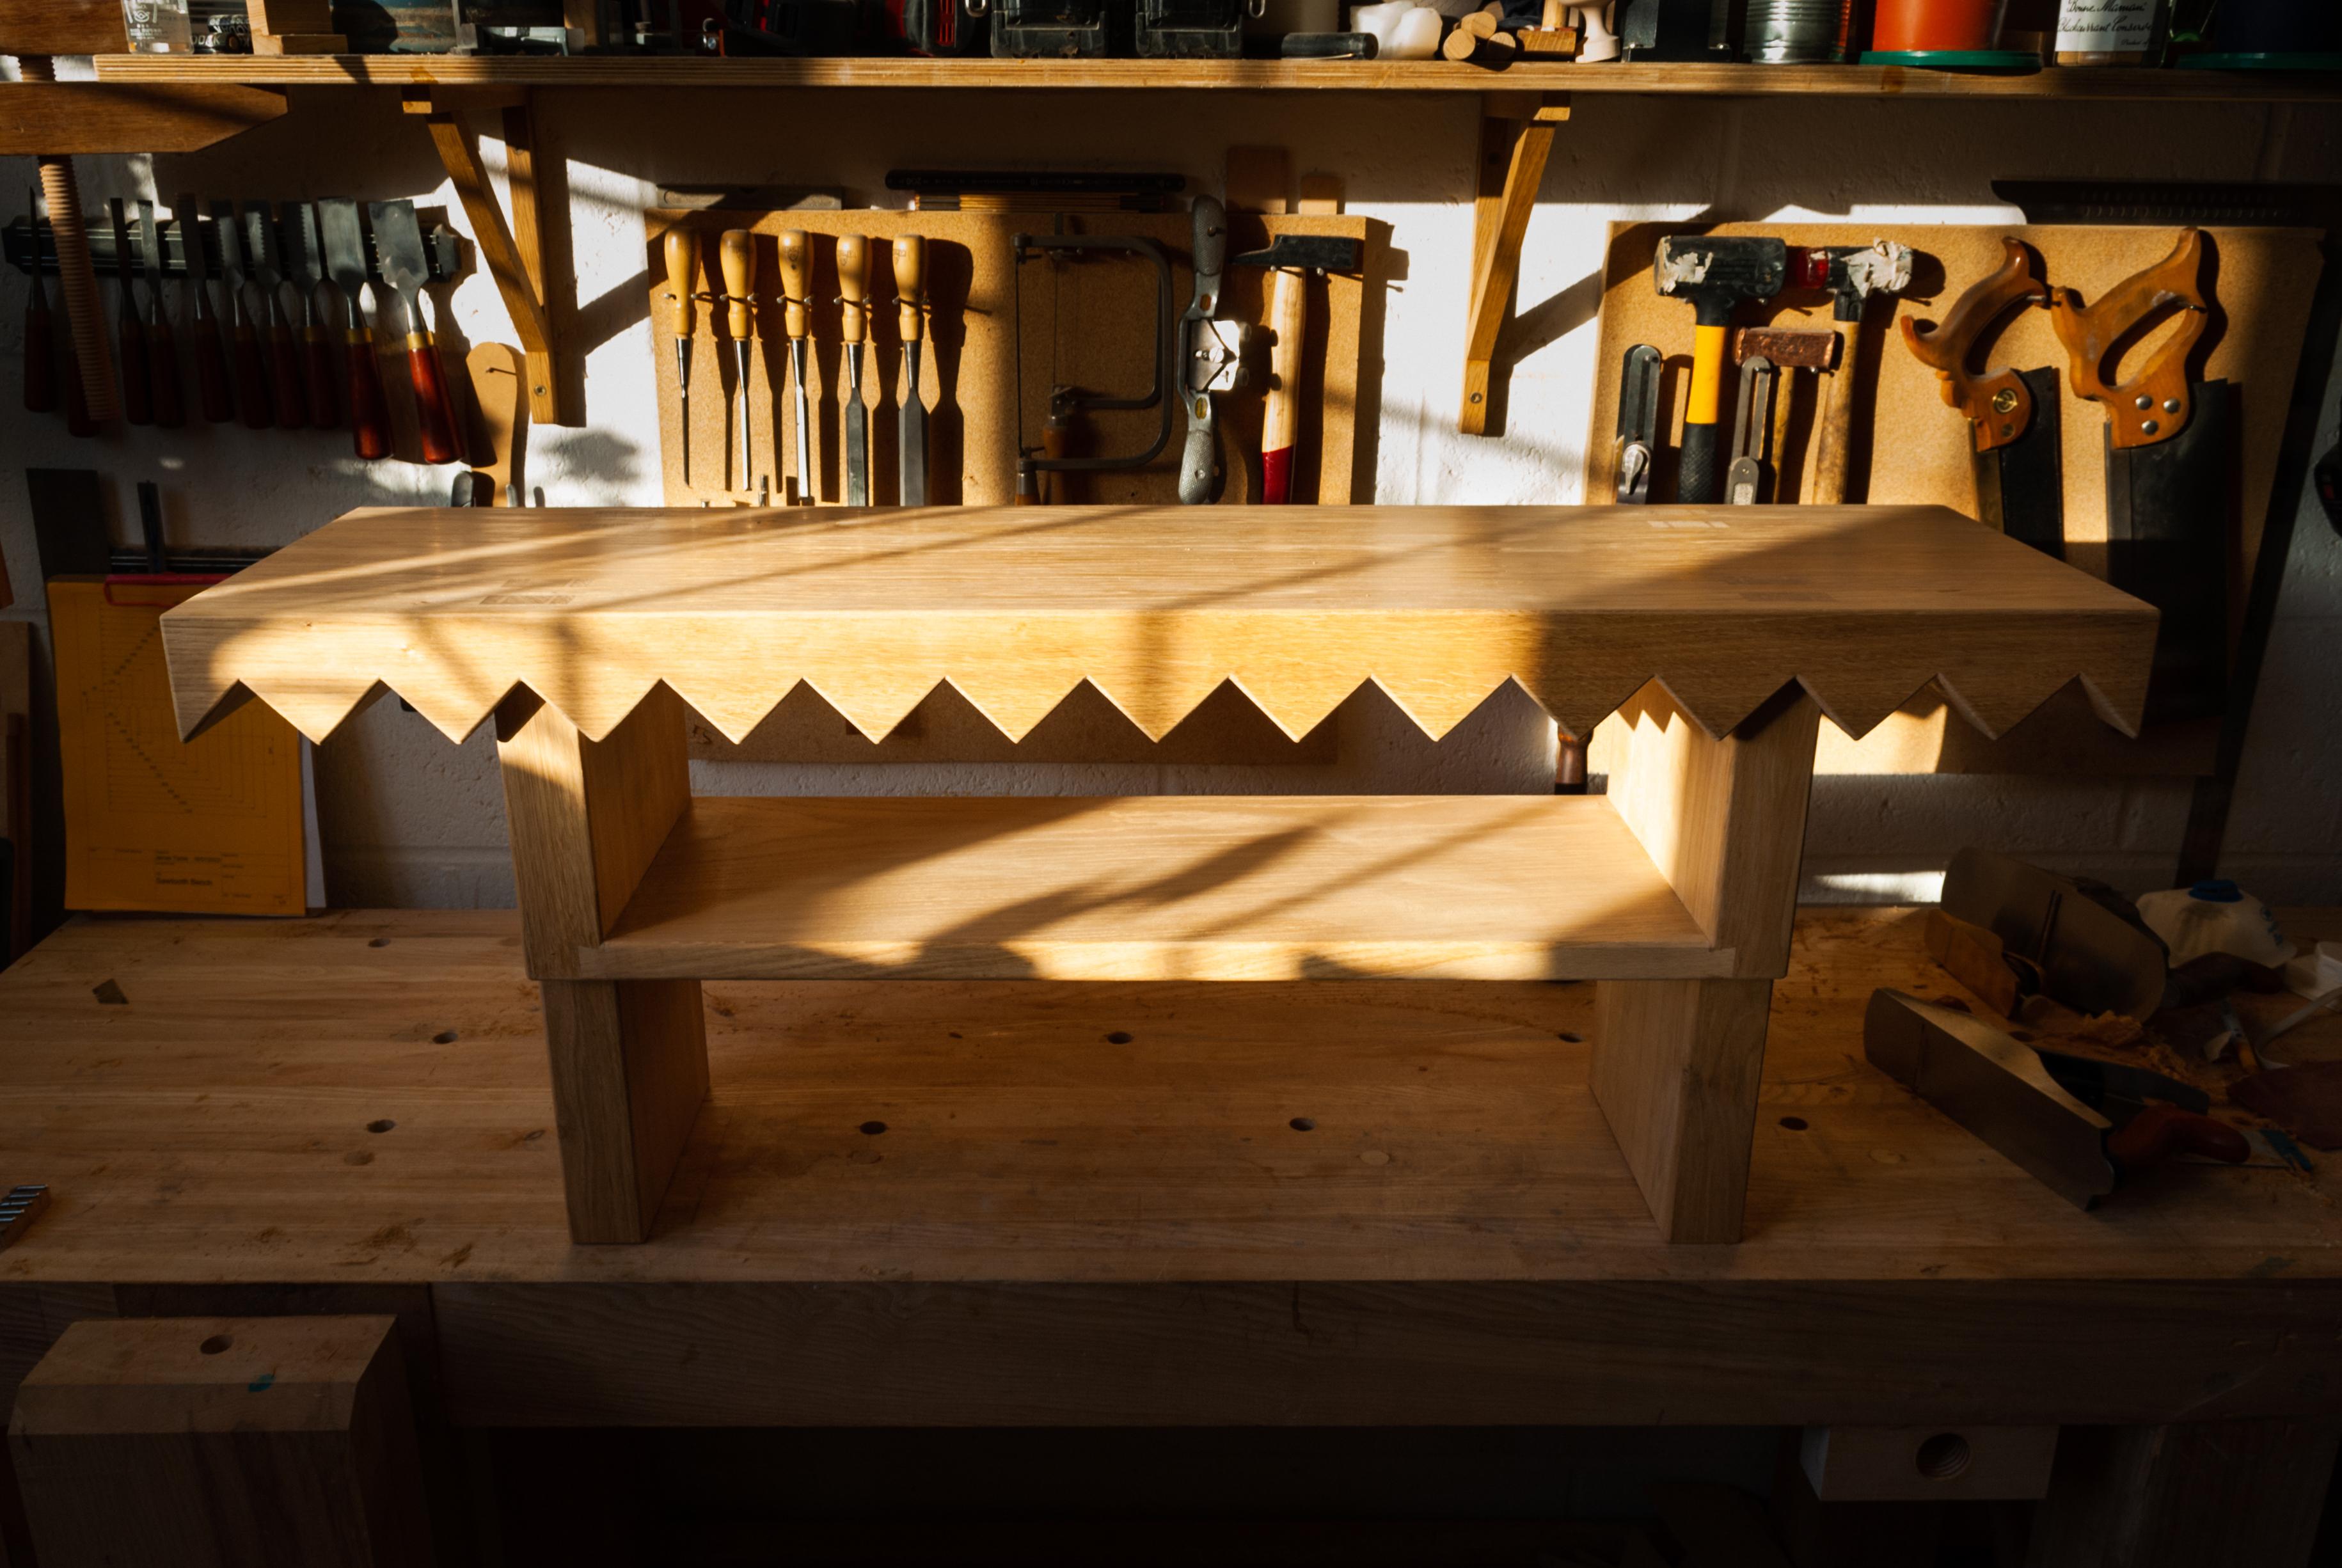 Sawtooth Bench in Solid English Oak, Designed and Handmade by Loose Fit In New Condition For Sale In Bexhill-on-Sea East Sussex, GB